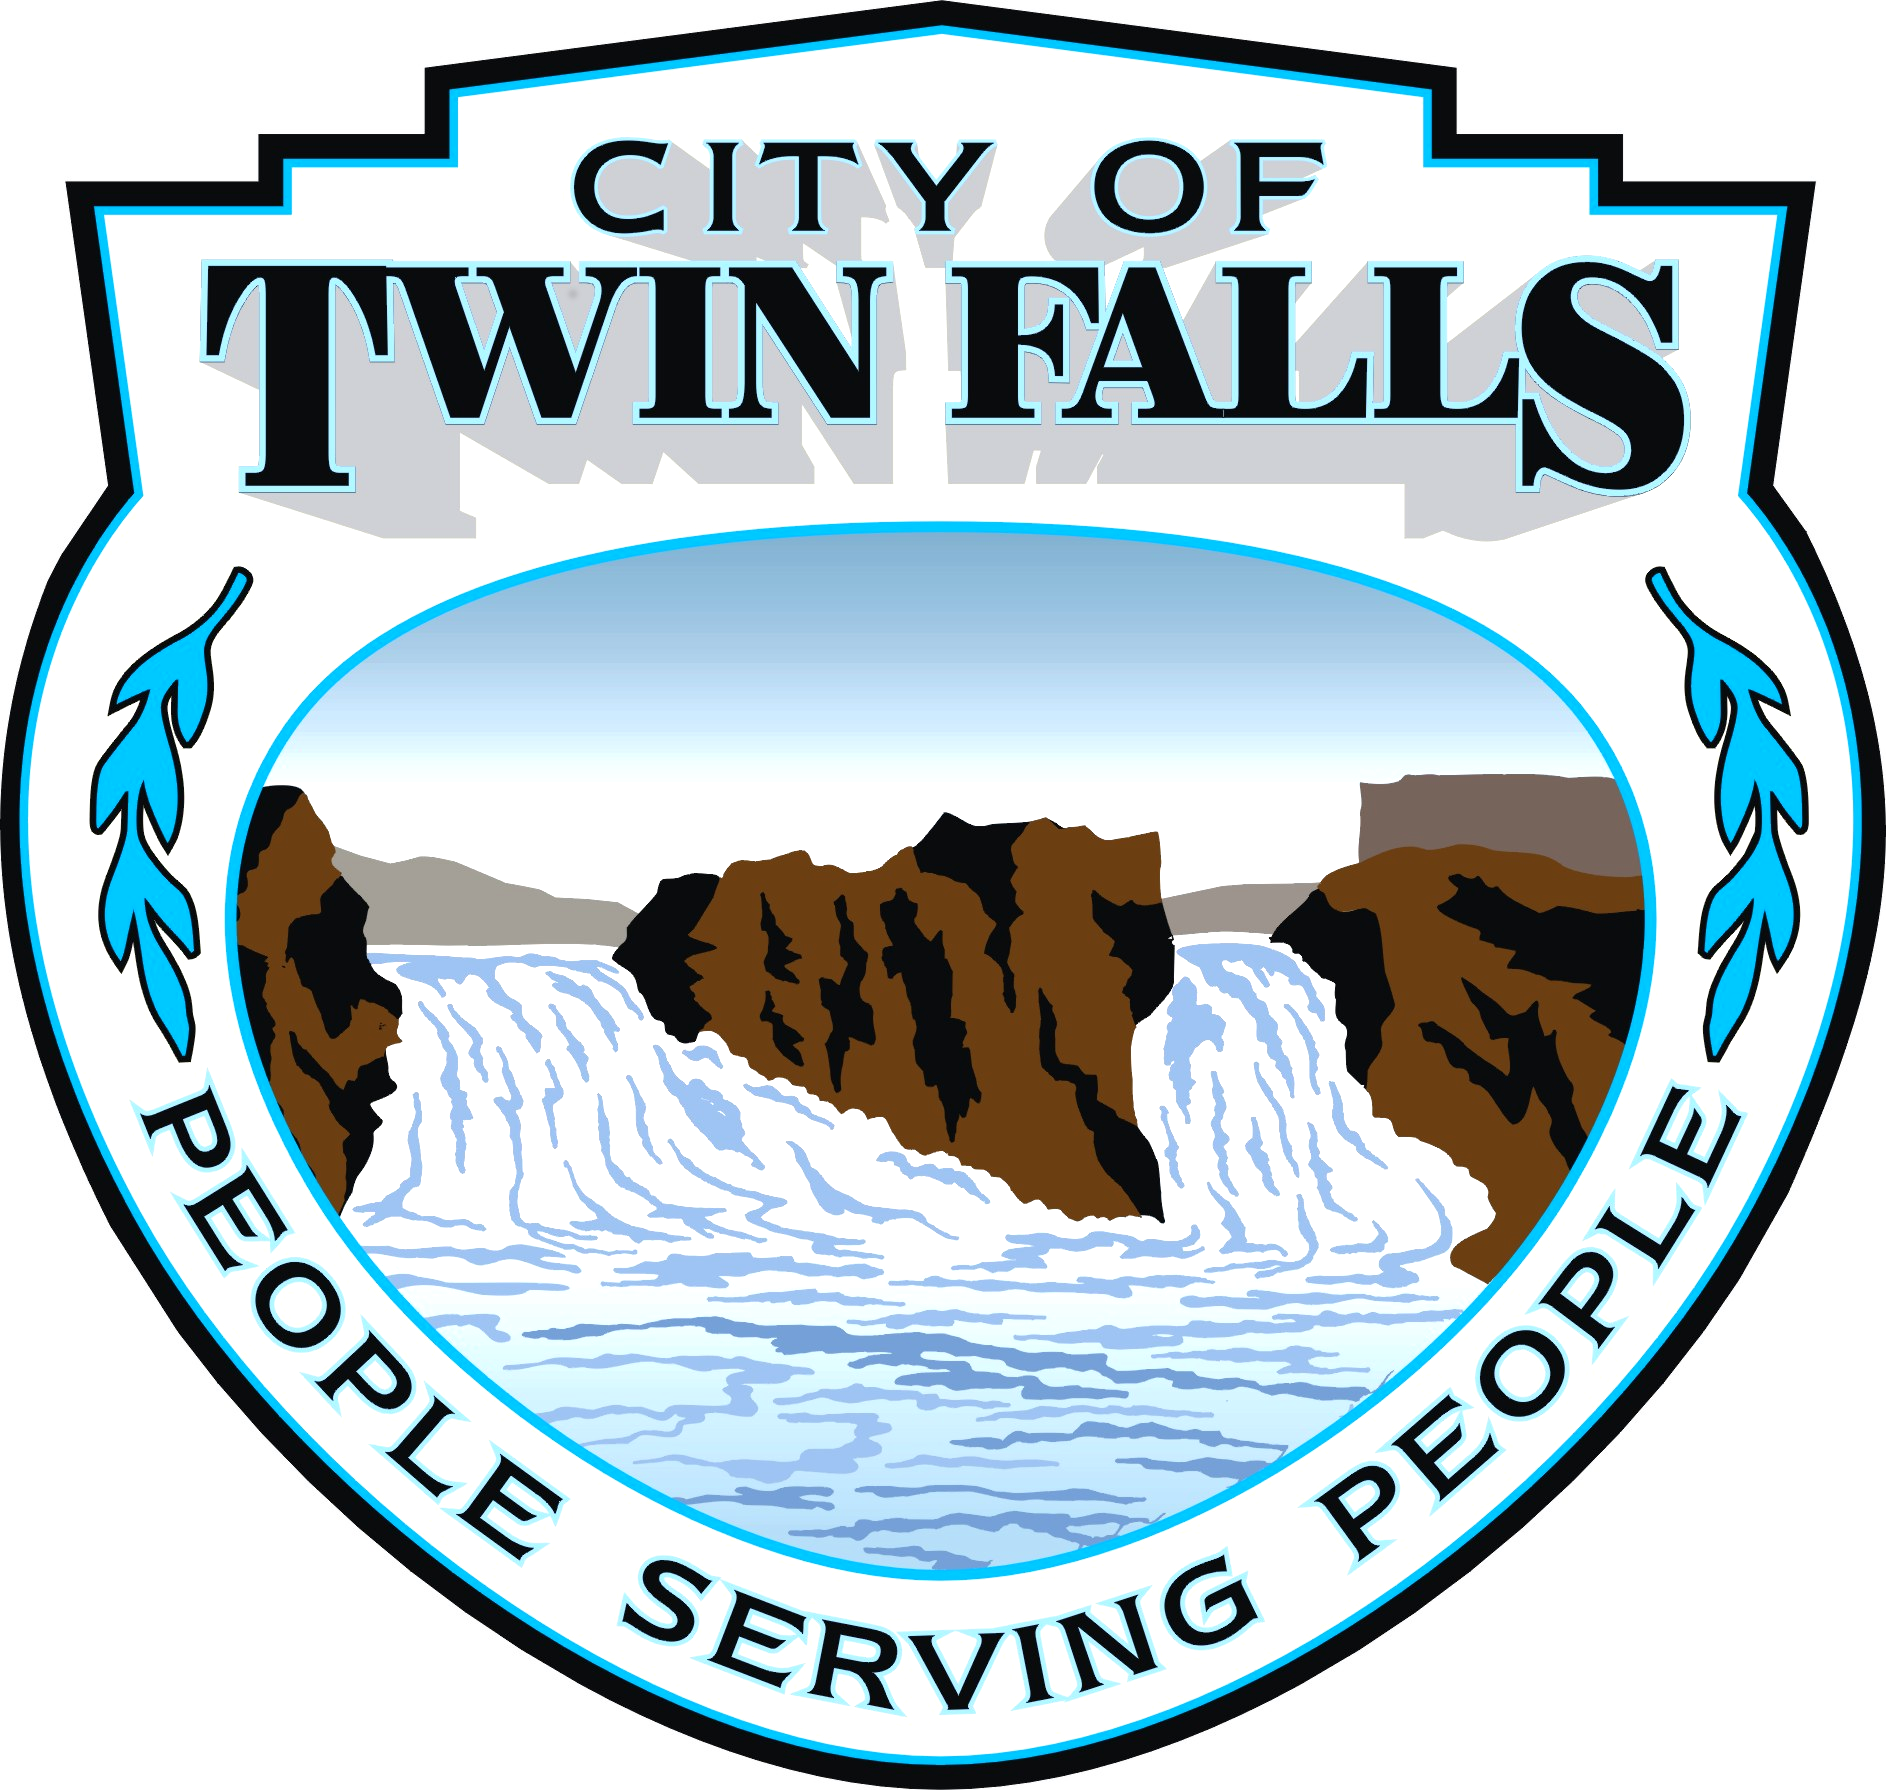 City of Twin Falls Logo and Link to their website